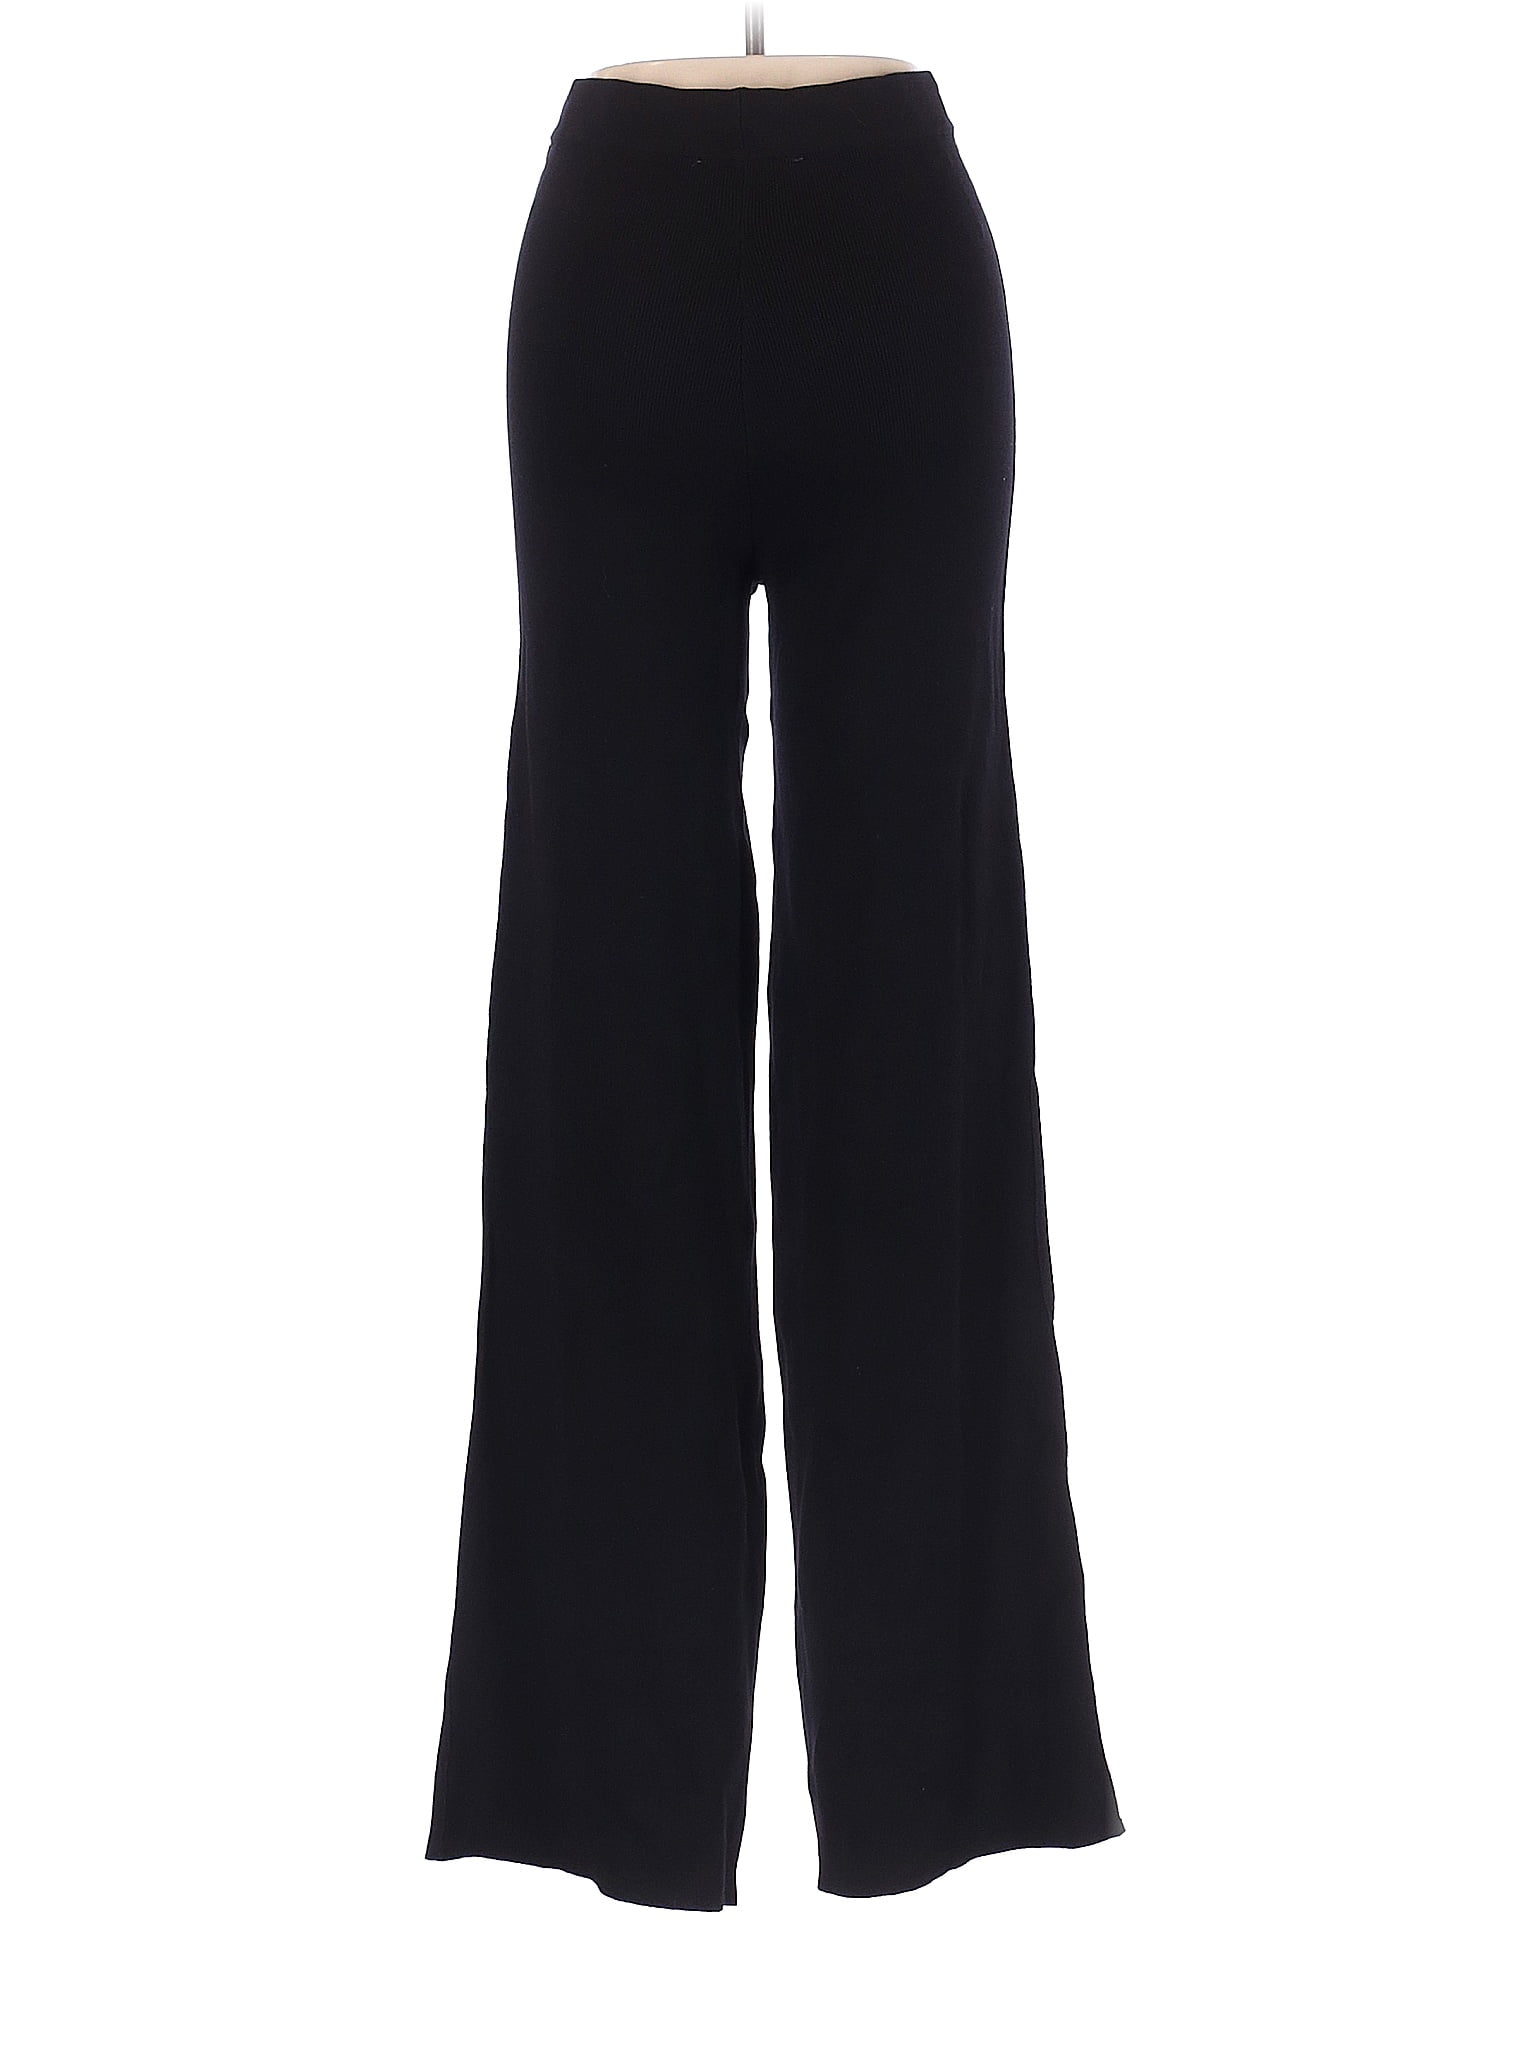 Hera Collection Solid Black Casual Pants Size M - 68% off